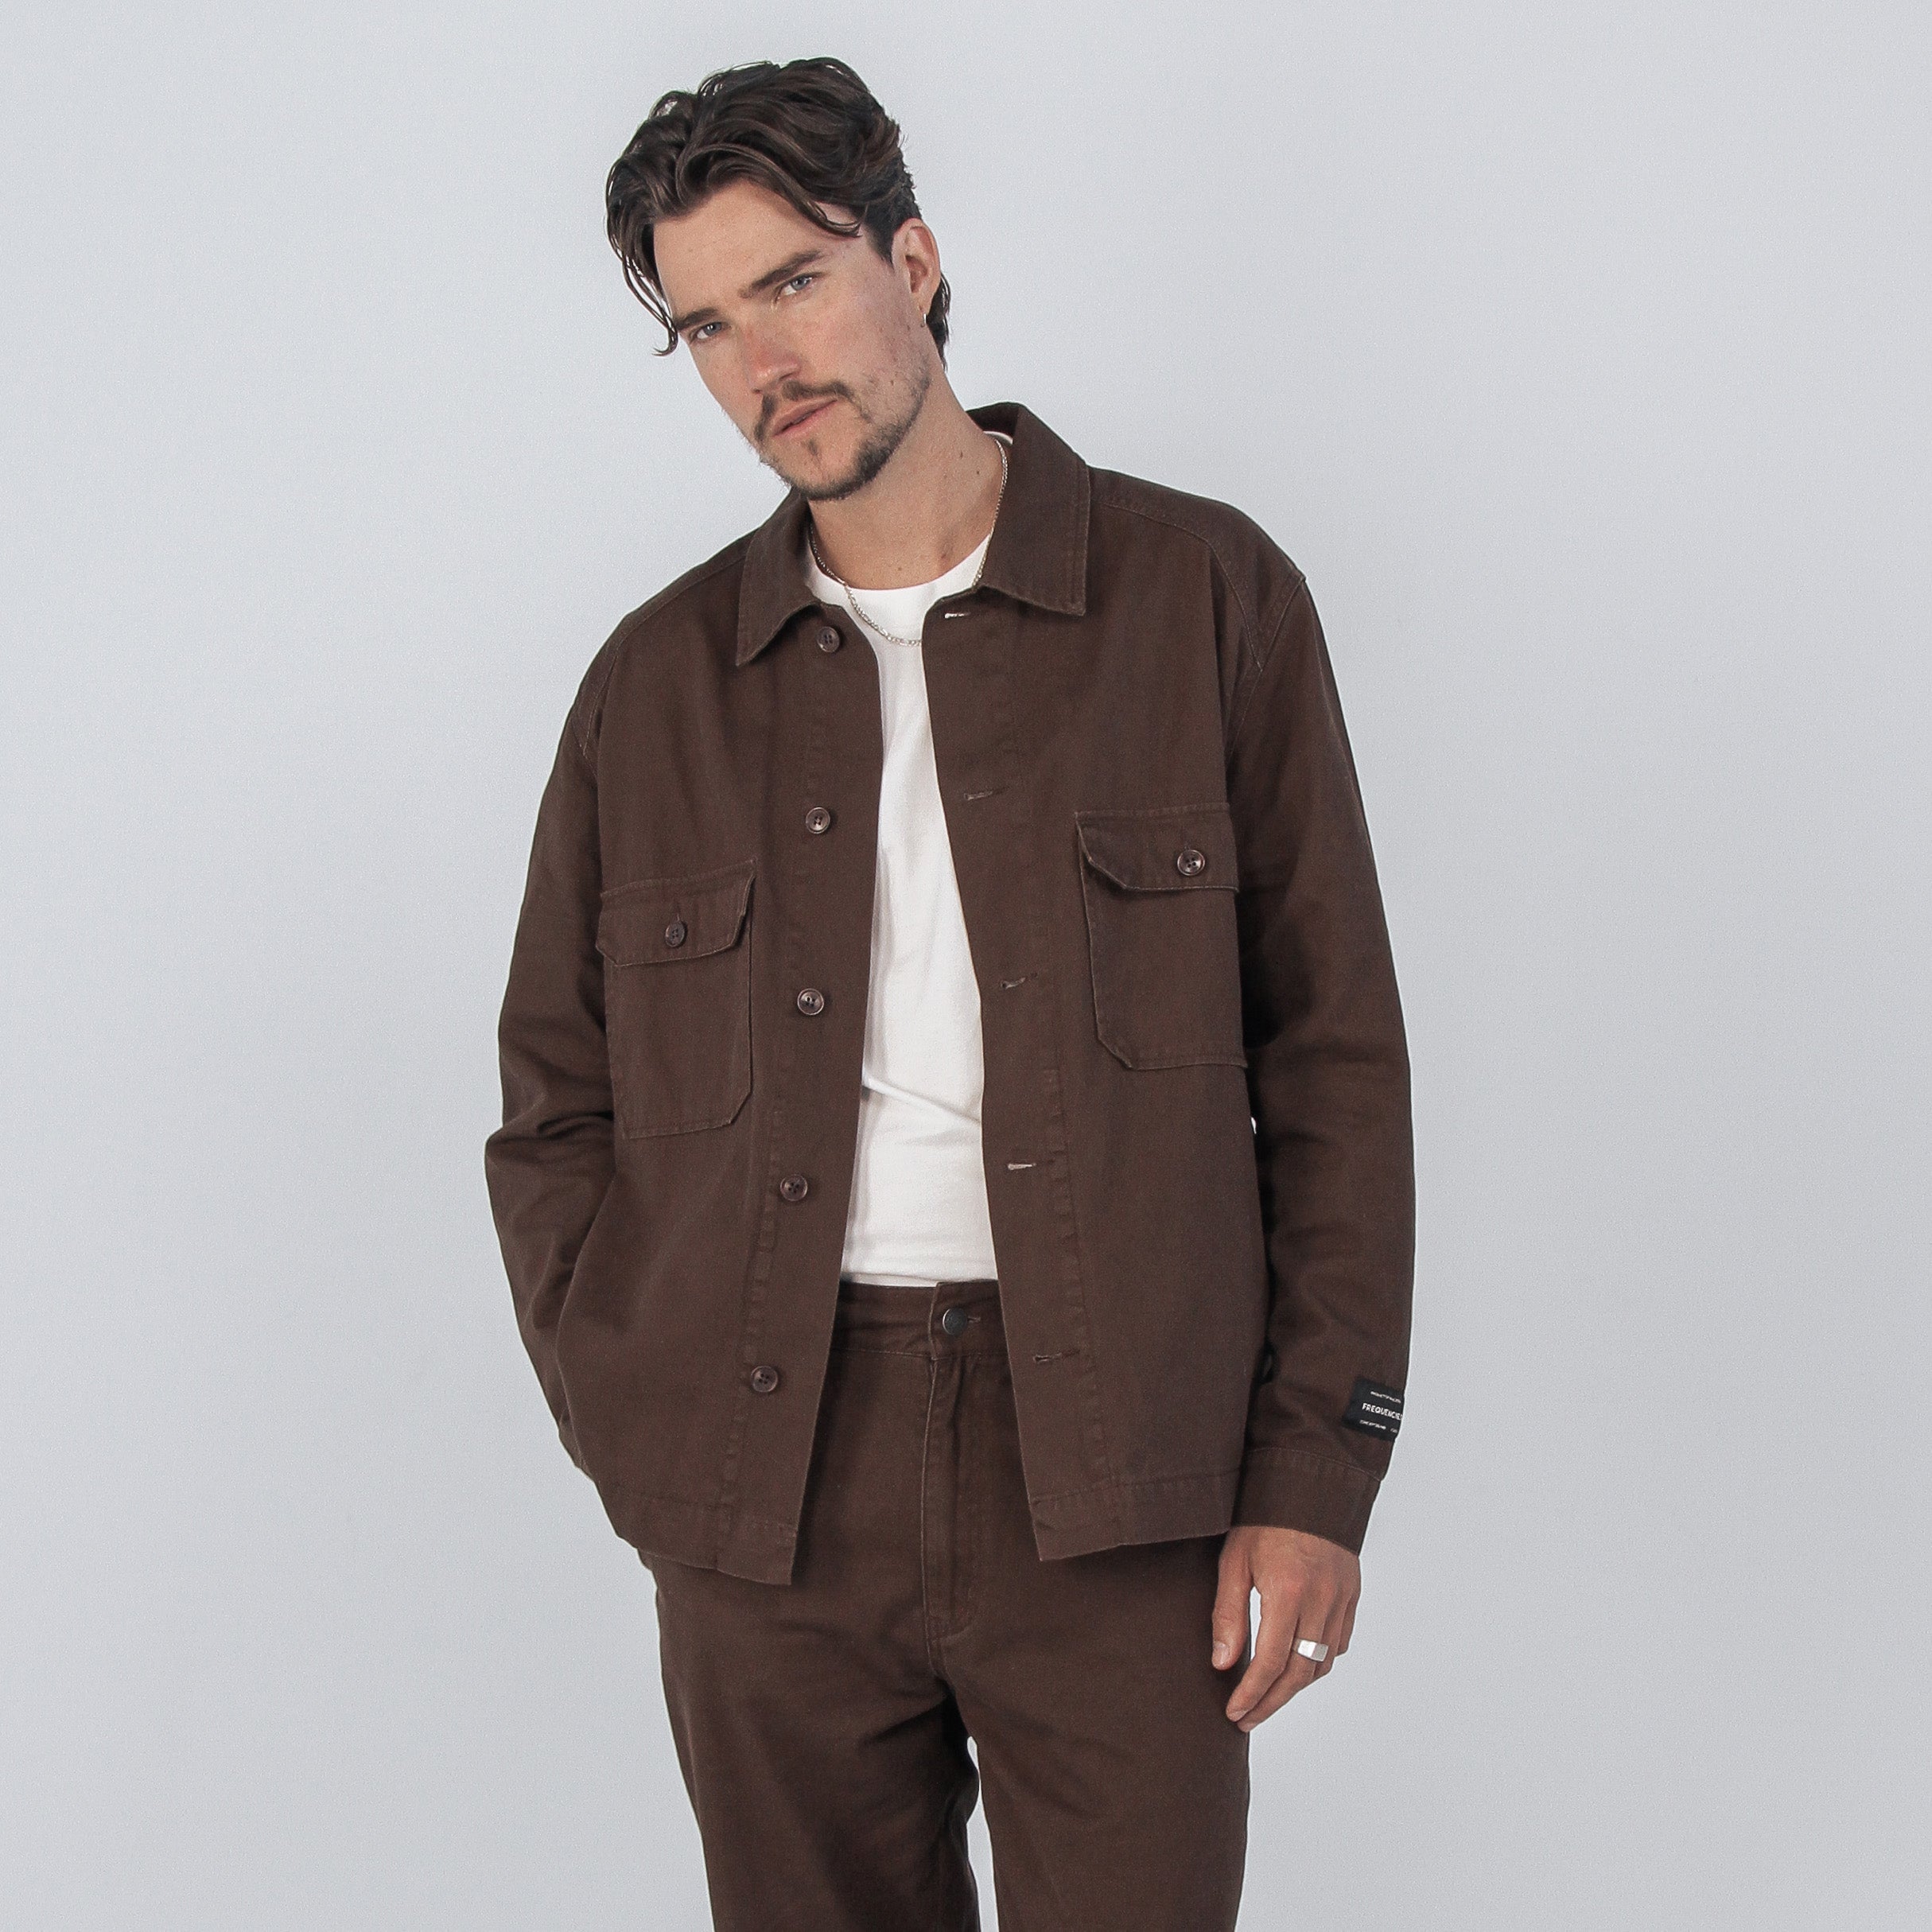 PHASER SHIRT JACKET - FADED BROWN